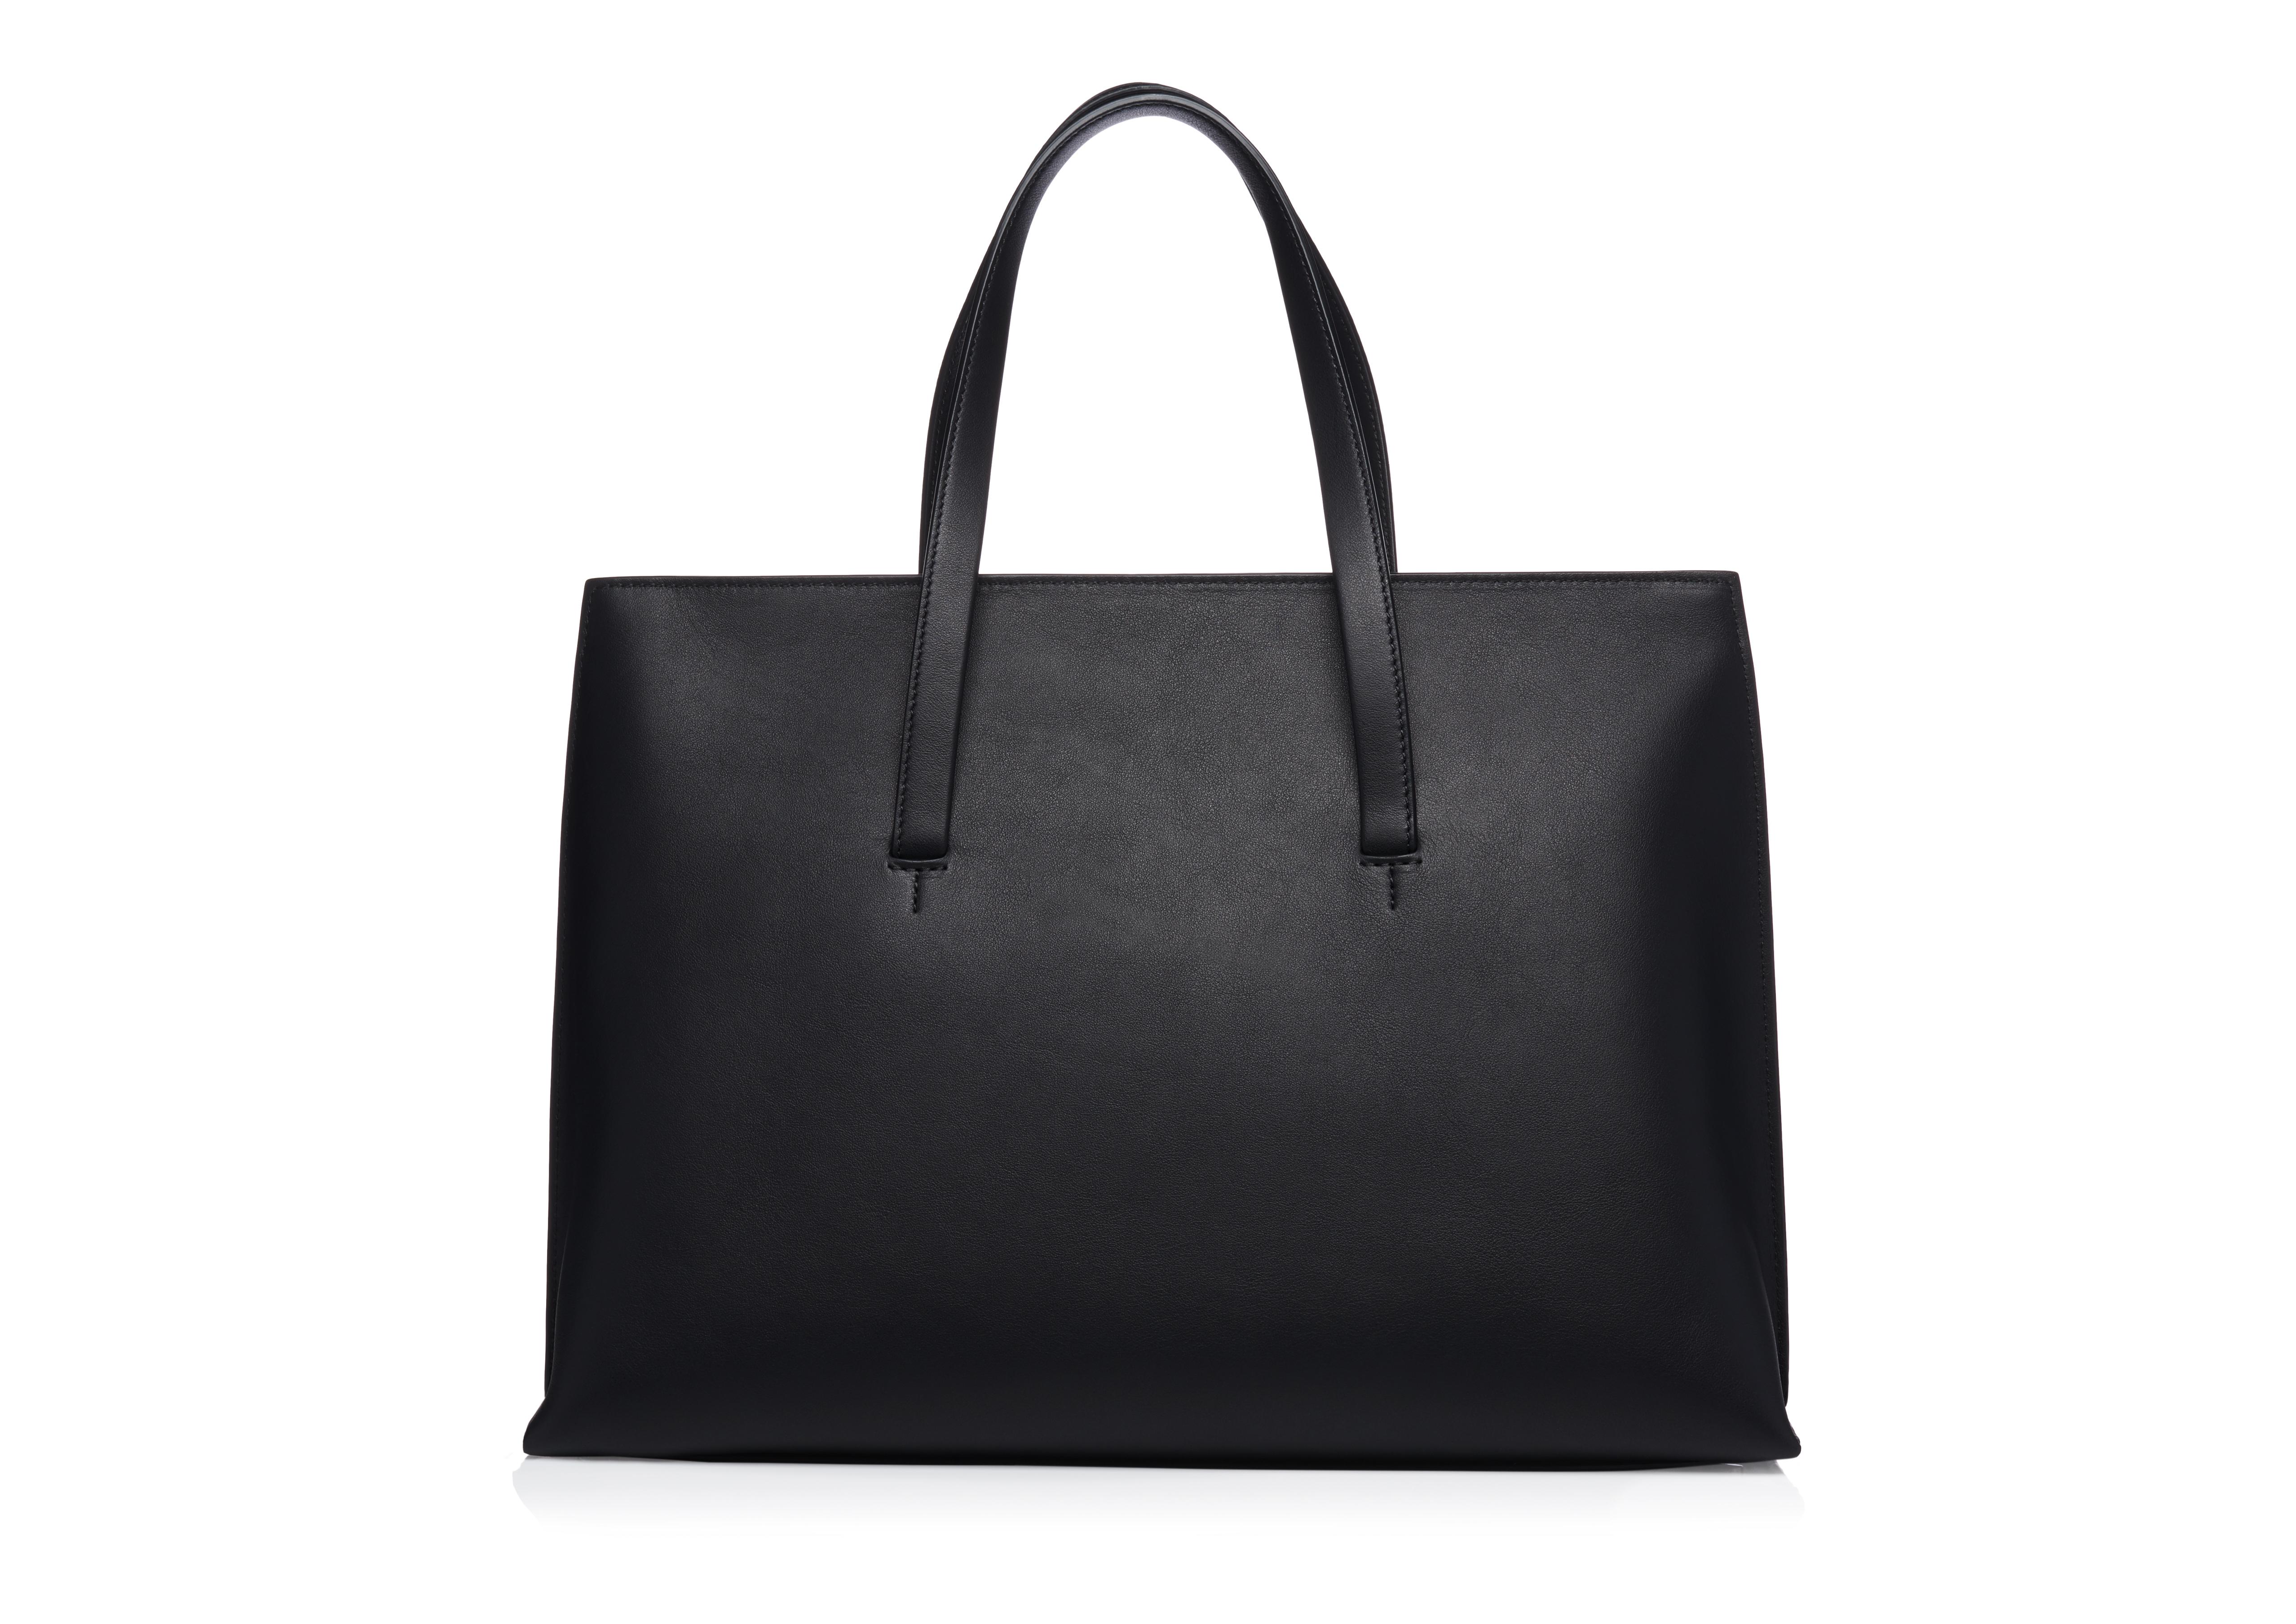 2 Stores In Stock: TOM FORD Small Serina Tote Bag, Black | ModeSens